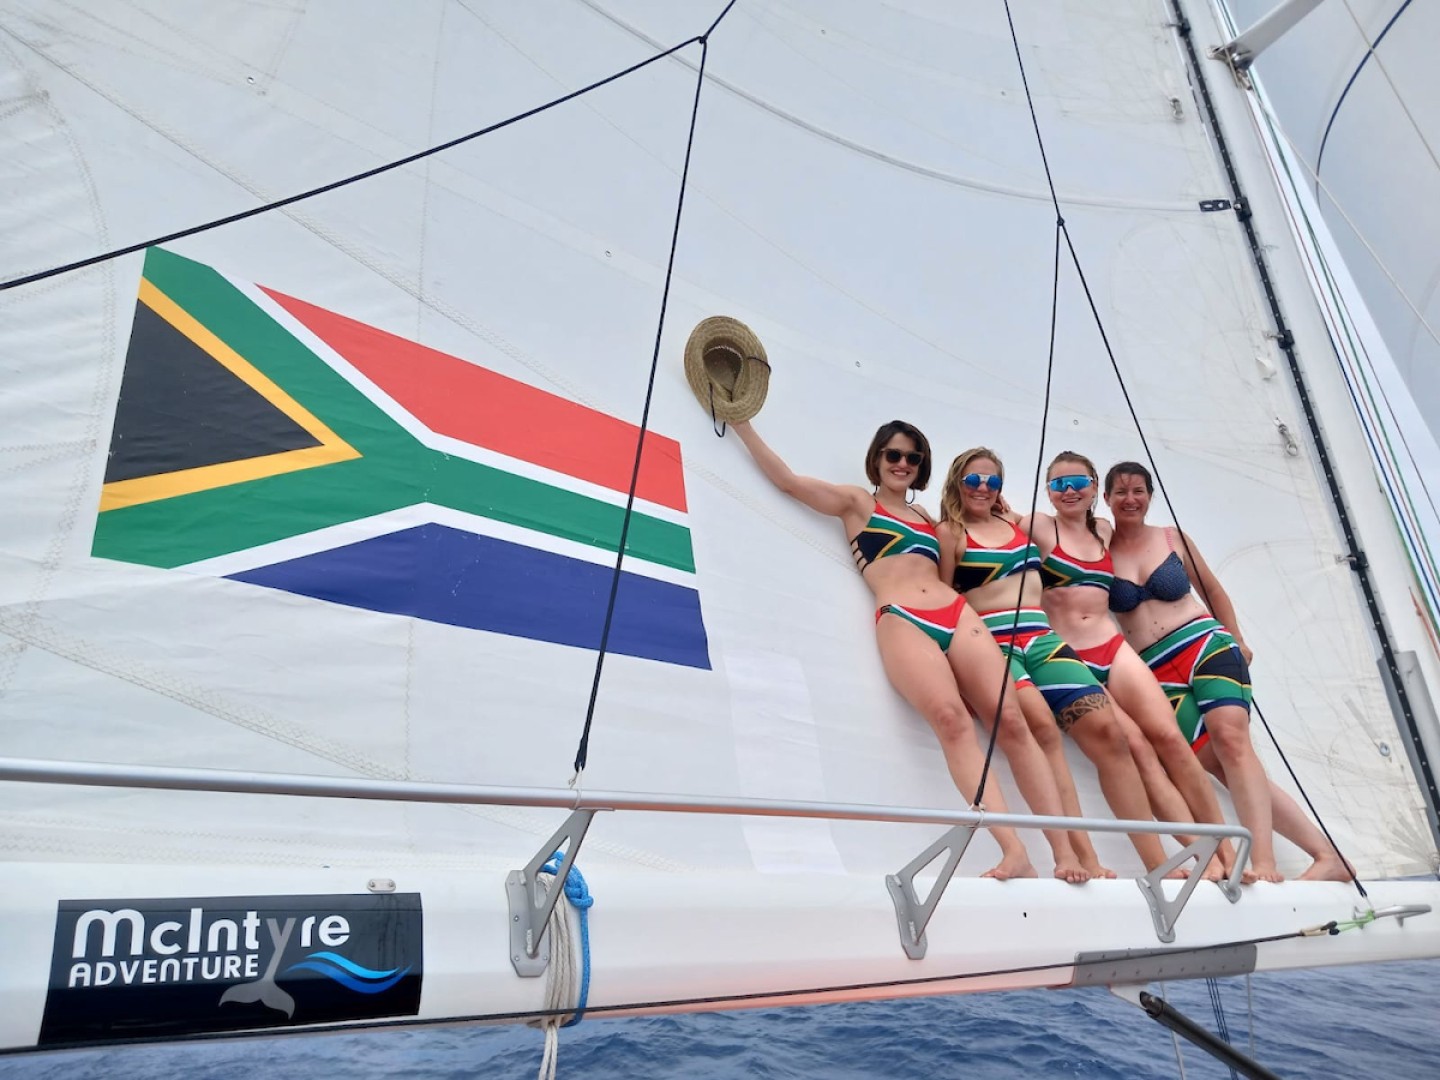 The proud South African yacht Sterna showing their support for their team taking on the French in the World Cup Rugby quarter-finals on Sunday